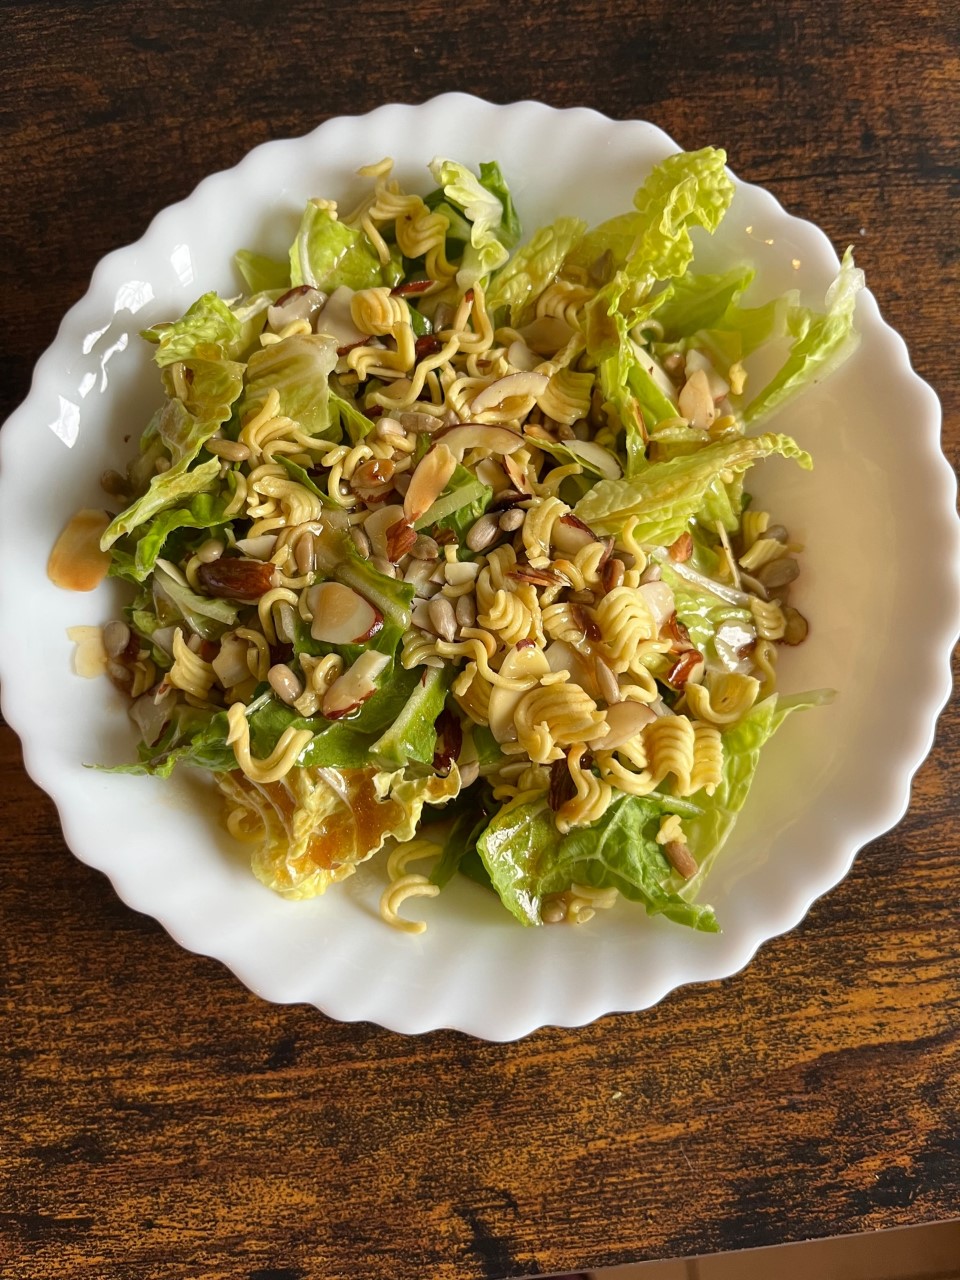 Cabbage salad on a white plate with a brown background